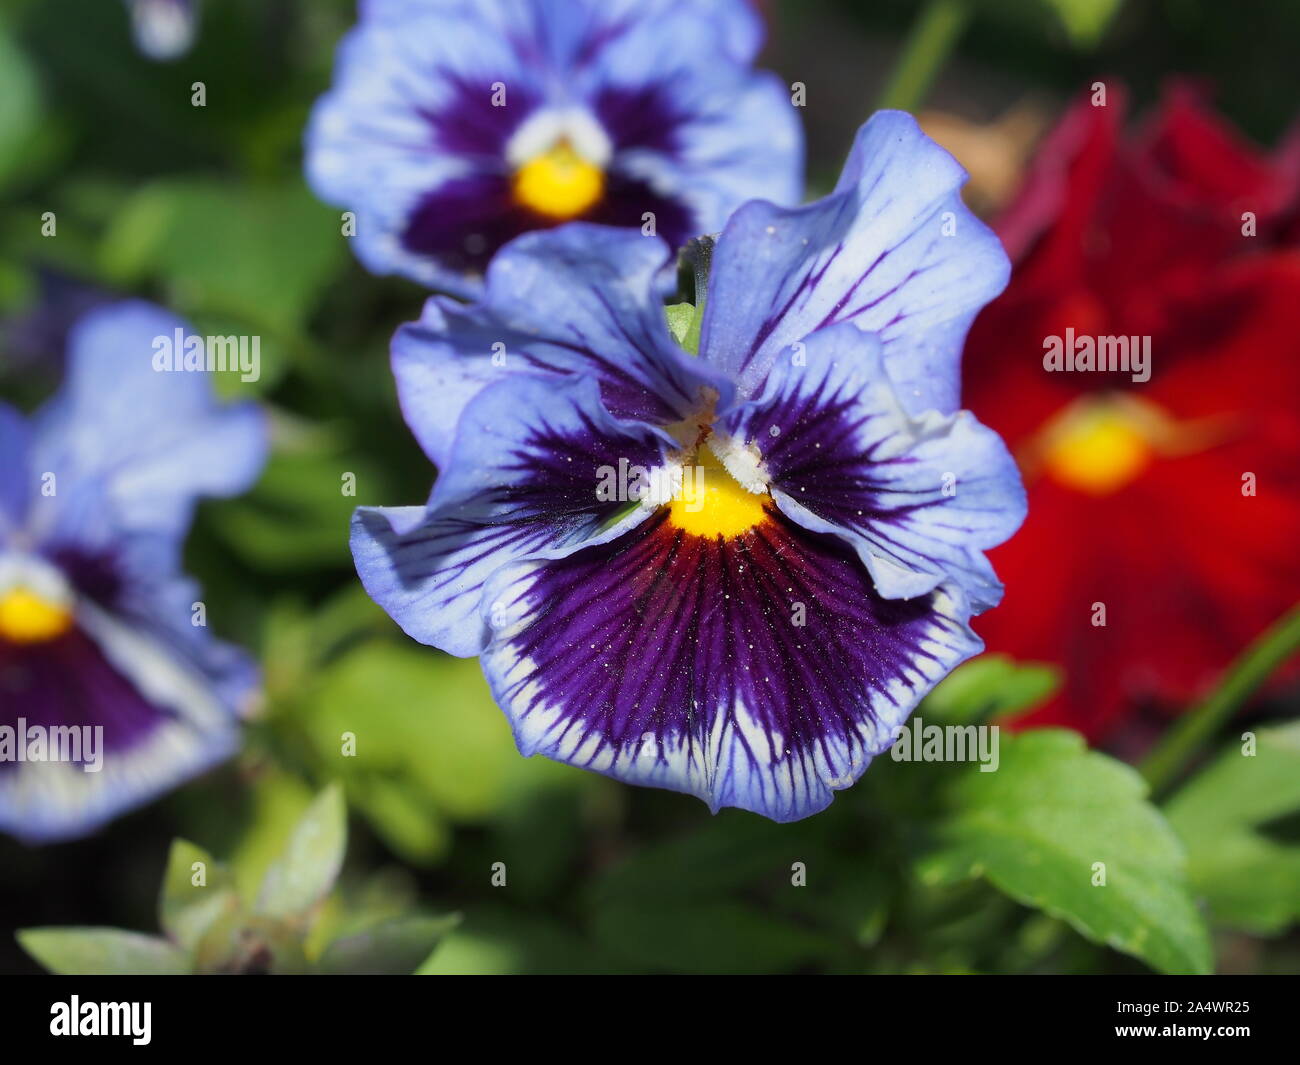 Pansy. The colorful petals of the flower buds. Garden flowers. Macrophoto. Stock Photo